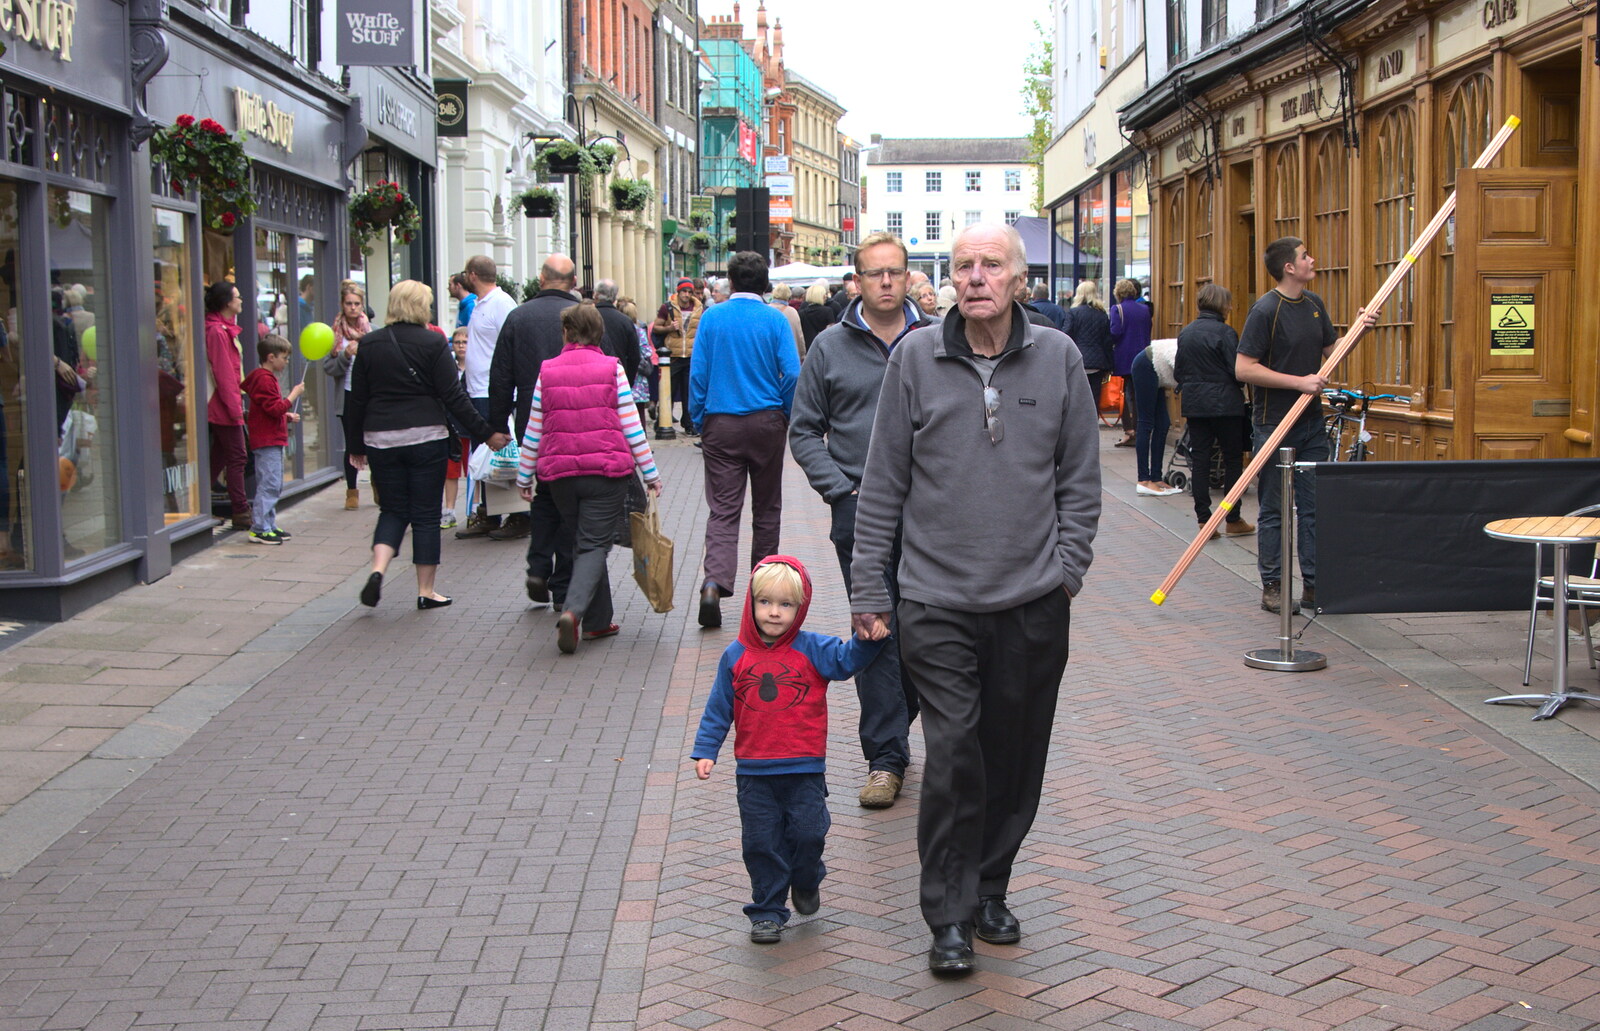 Harry and Grandad on Abbeygate Street from A Trip to Abbey Gardens, Bury St. Edmunds, Suffolk - 29th October 2014